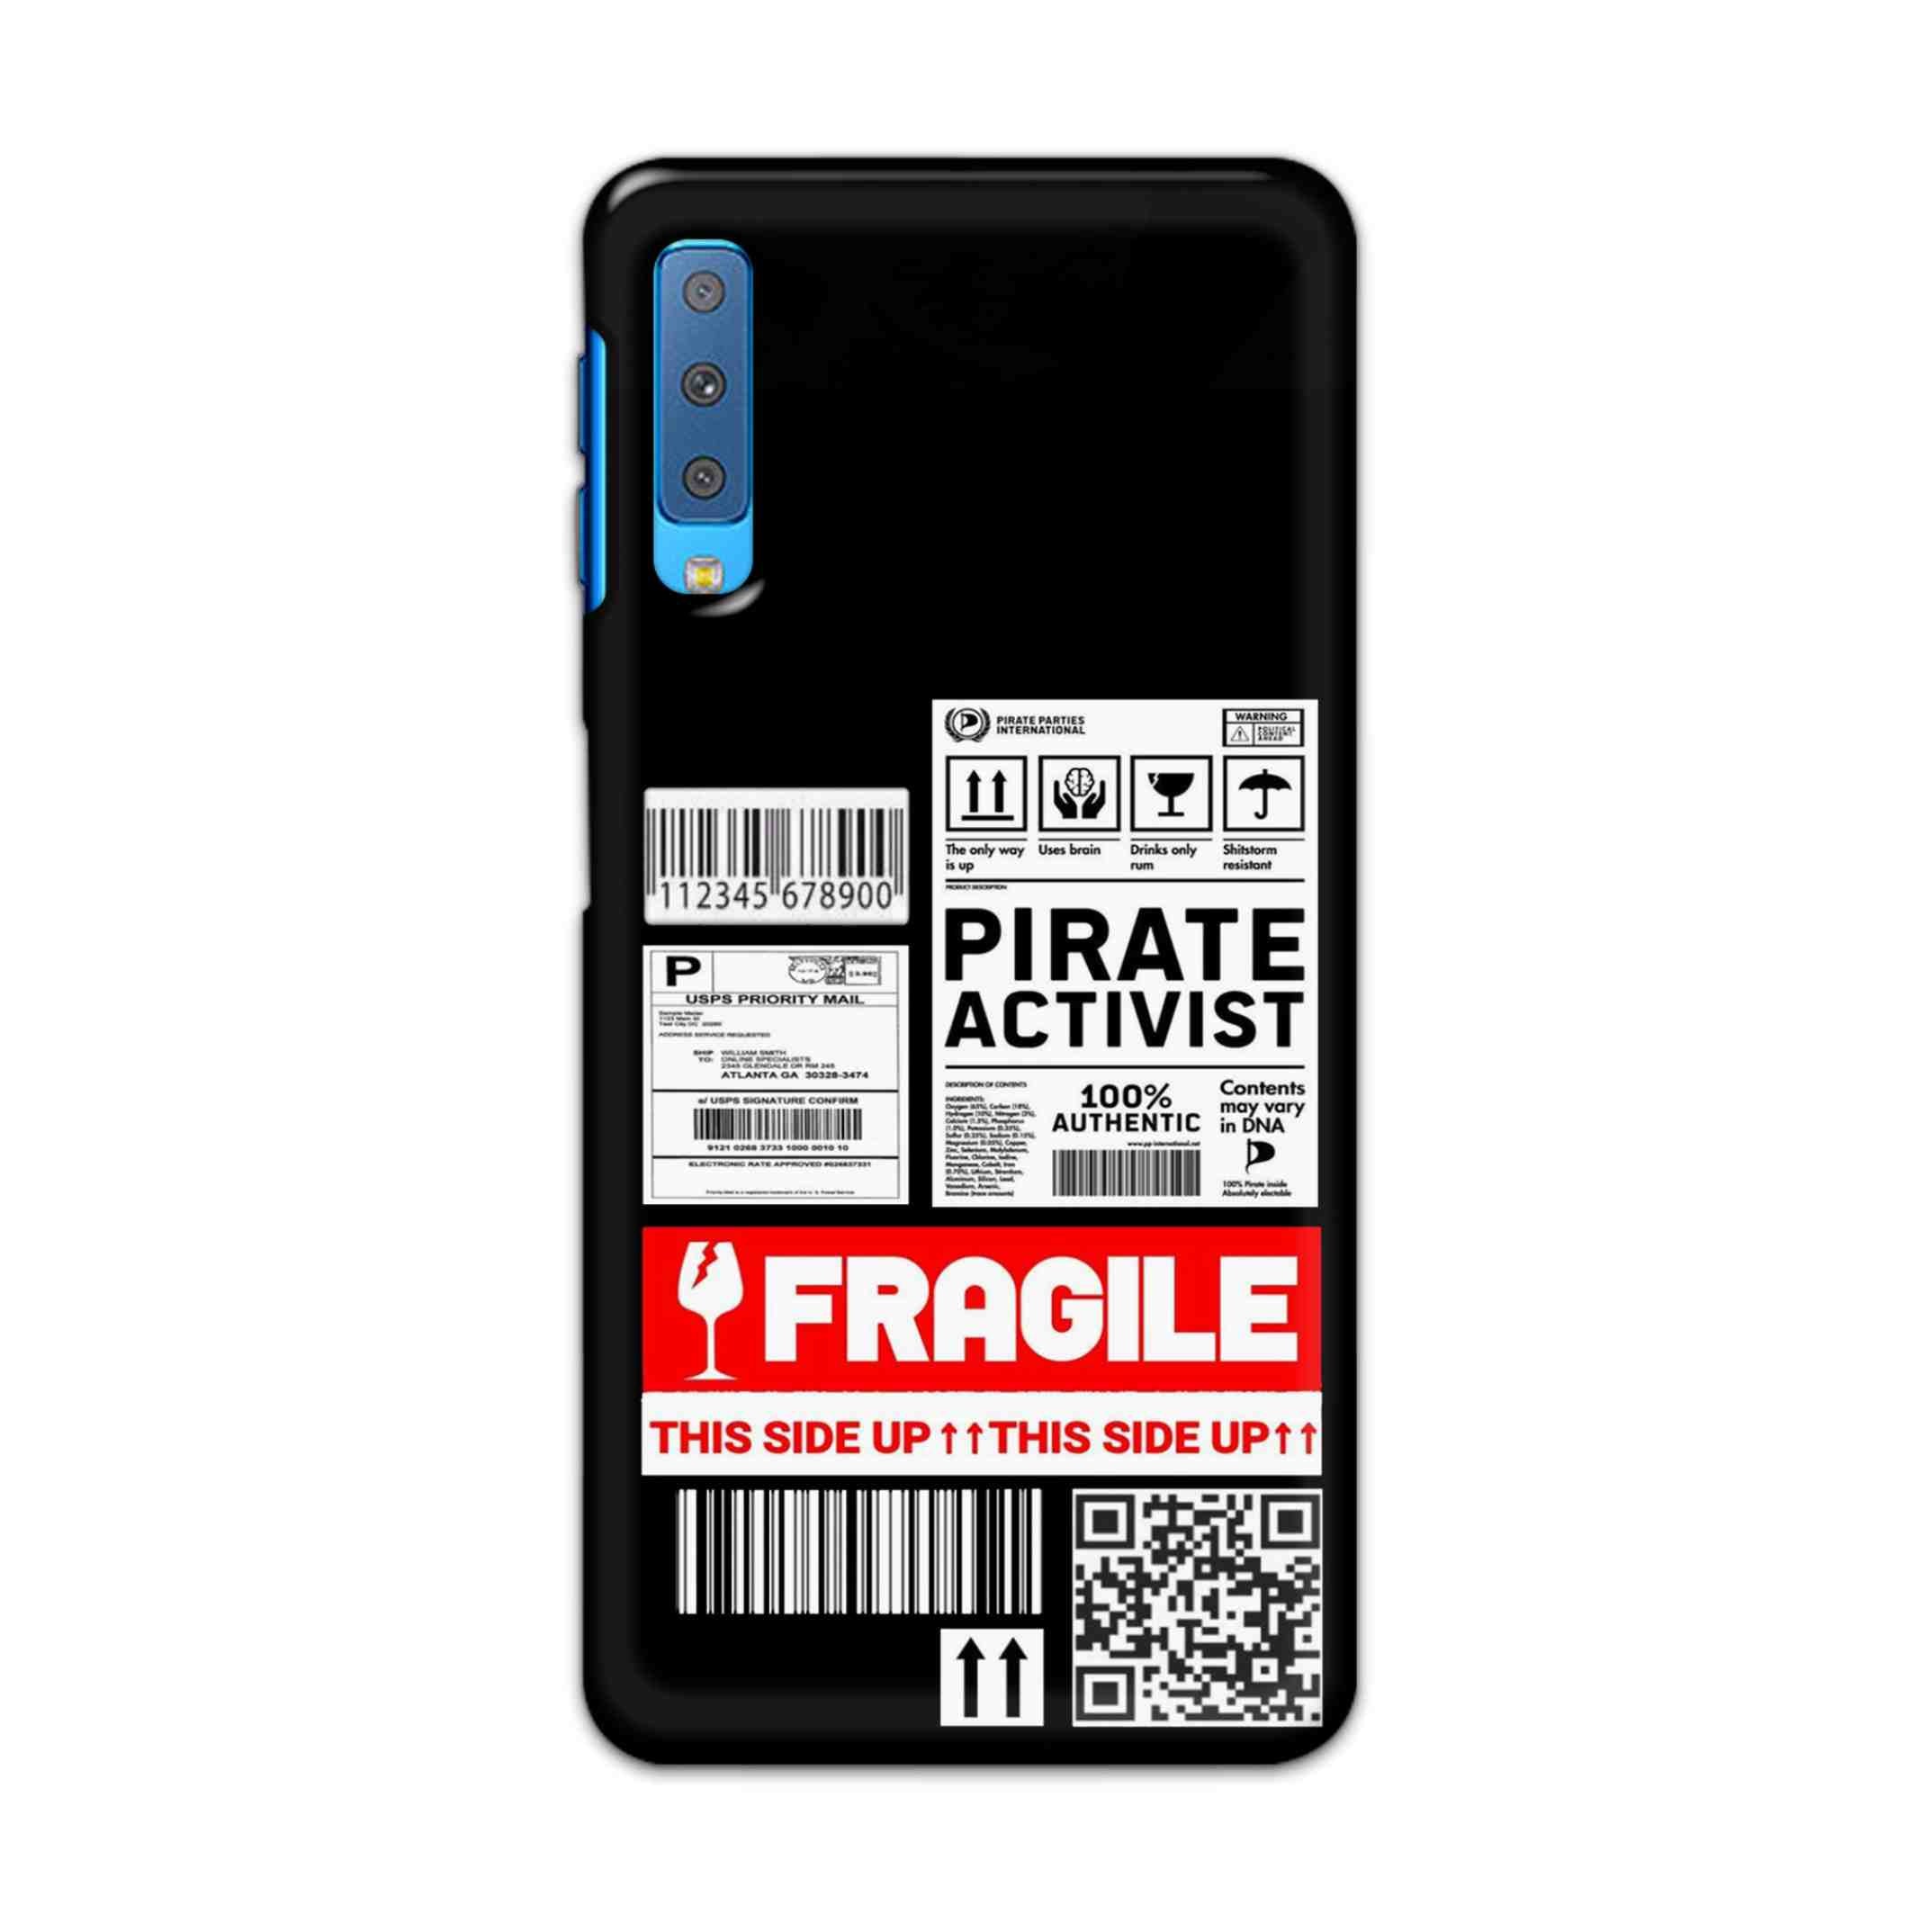 Buy Fragile Hard Back Mobile Phone Case Cover For Samsung Galaxy A7 2018 Online